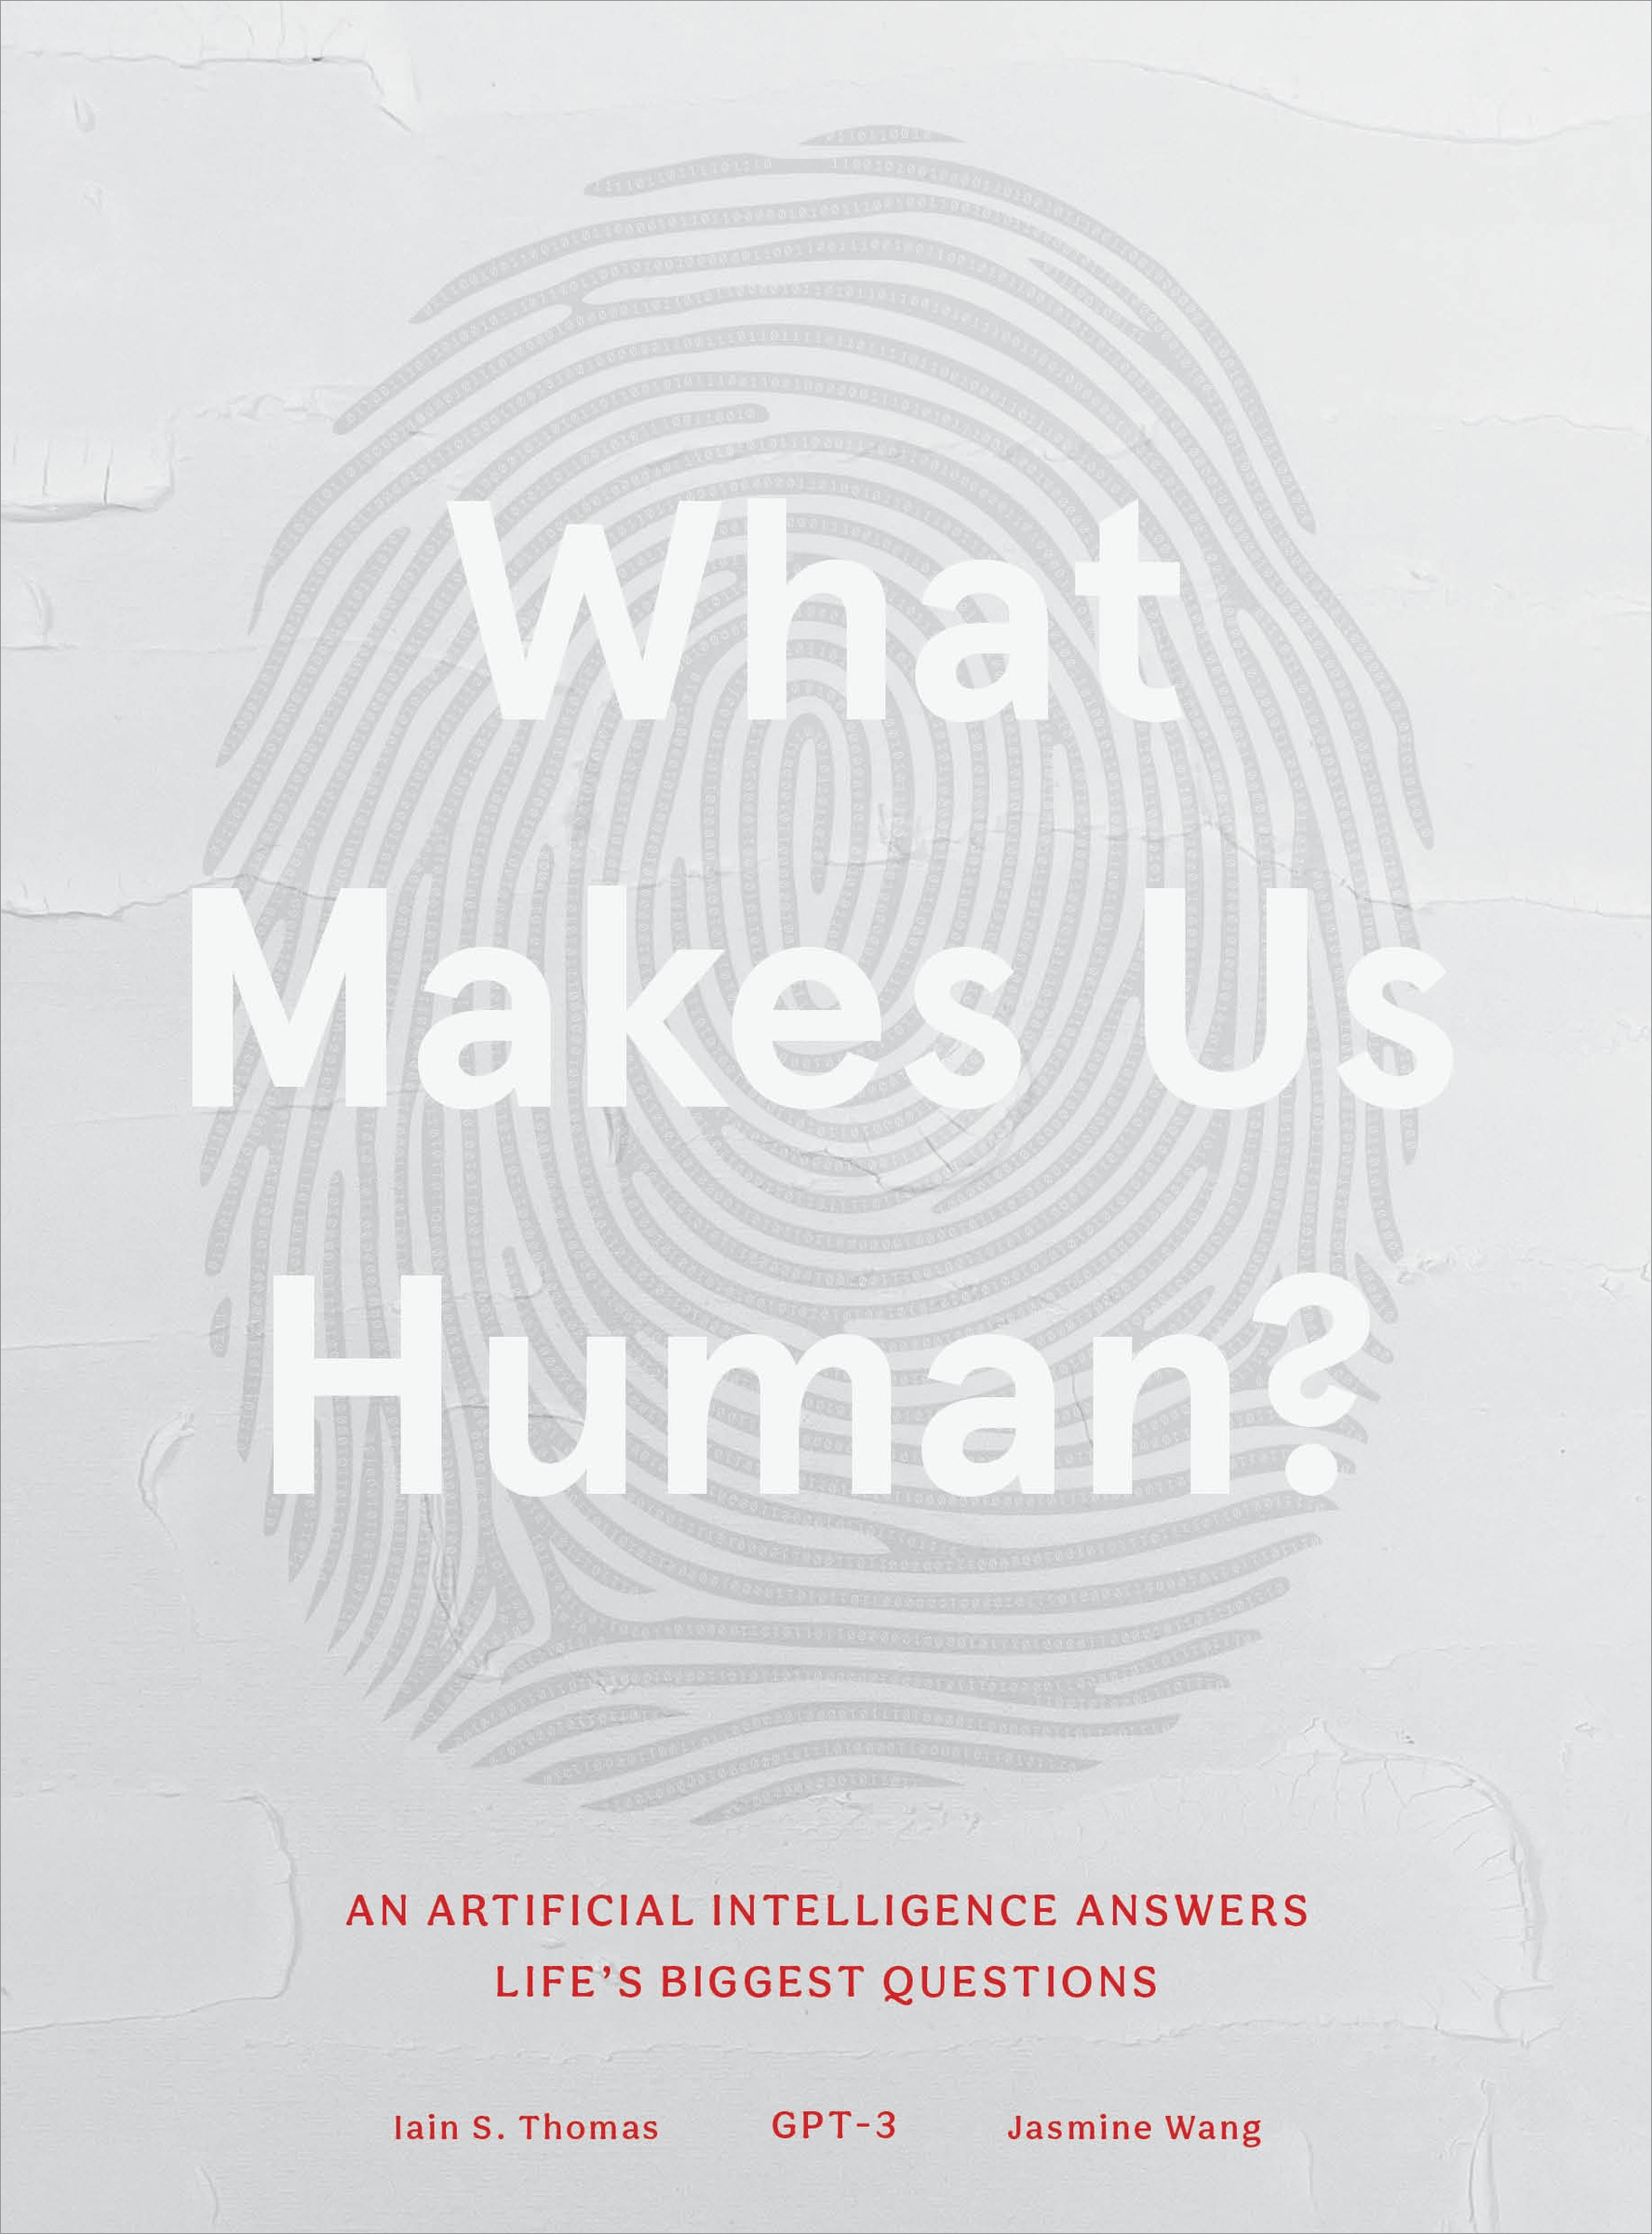 What Makes Us Human : An Artificial Intelligence Answers Life's Biggest Questions | Thomas, Iain S.